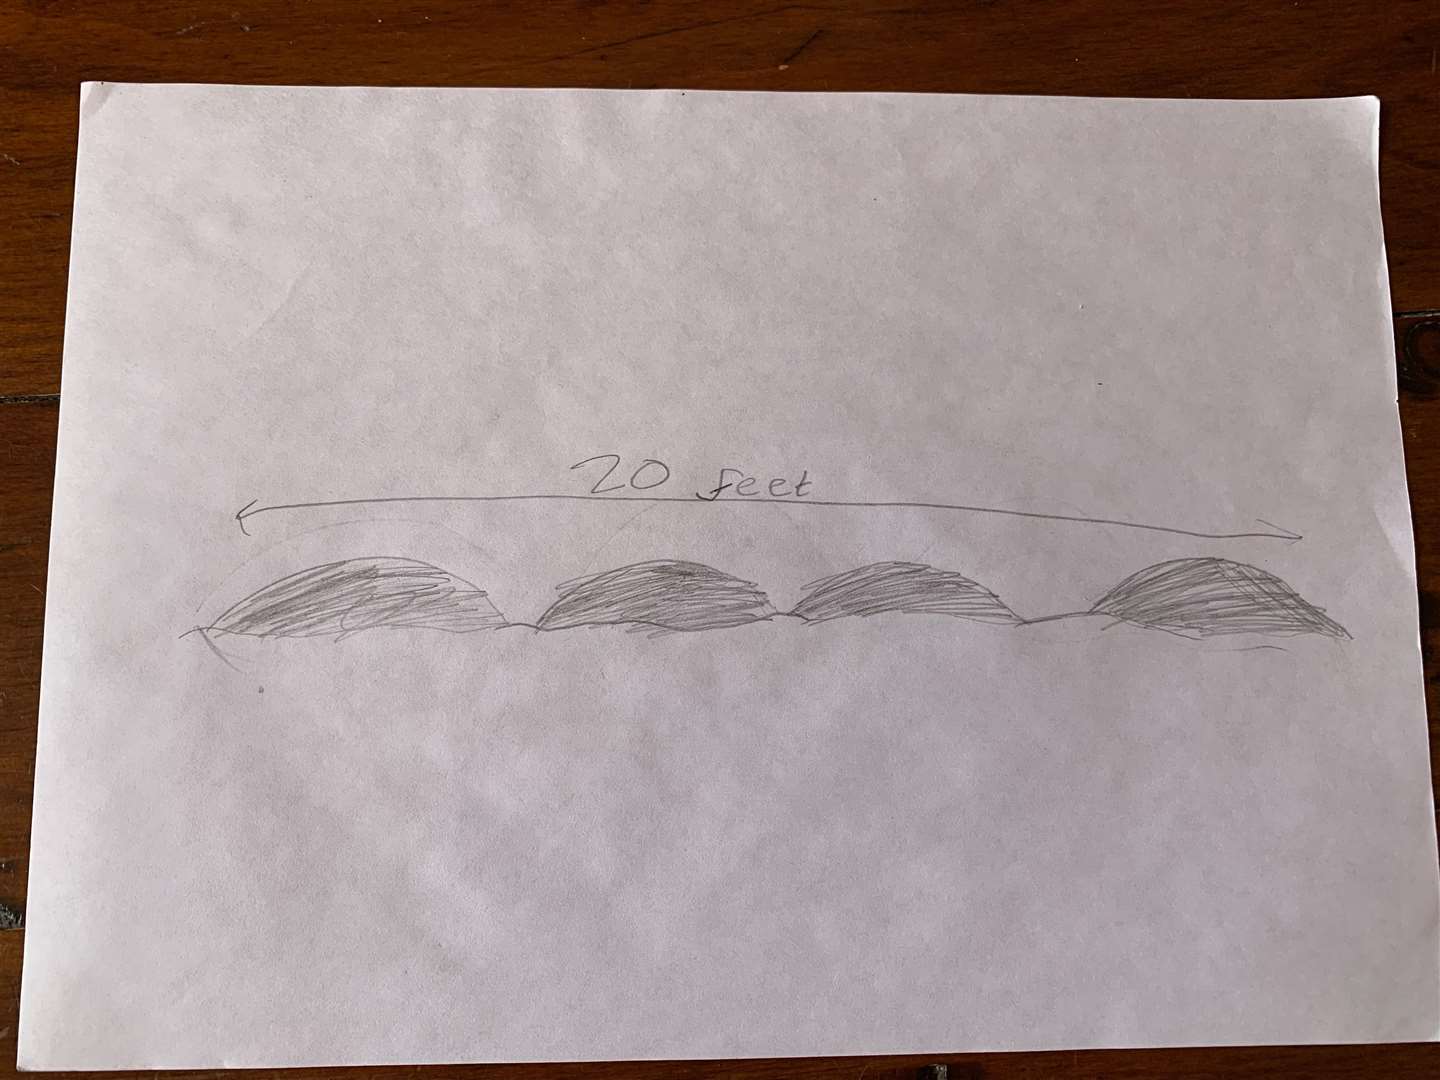 The drawing by Francesca McGarvey of what she saw on Loch Ness.